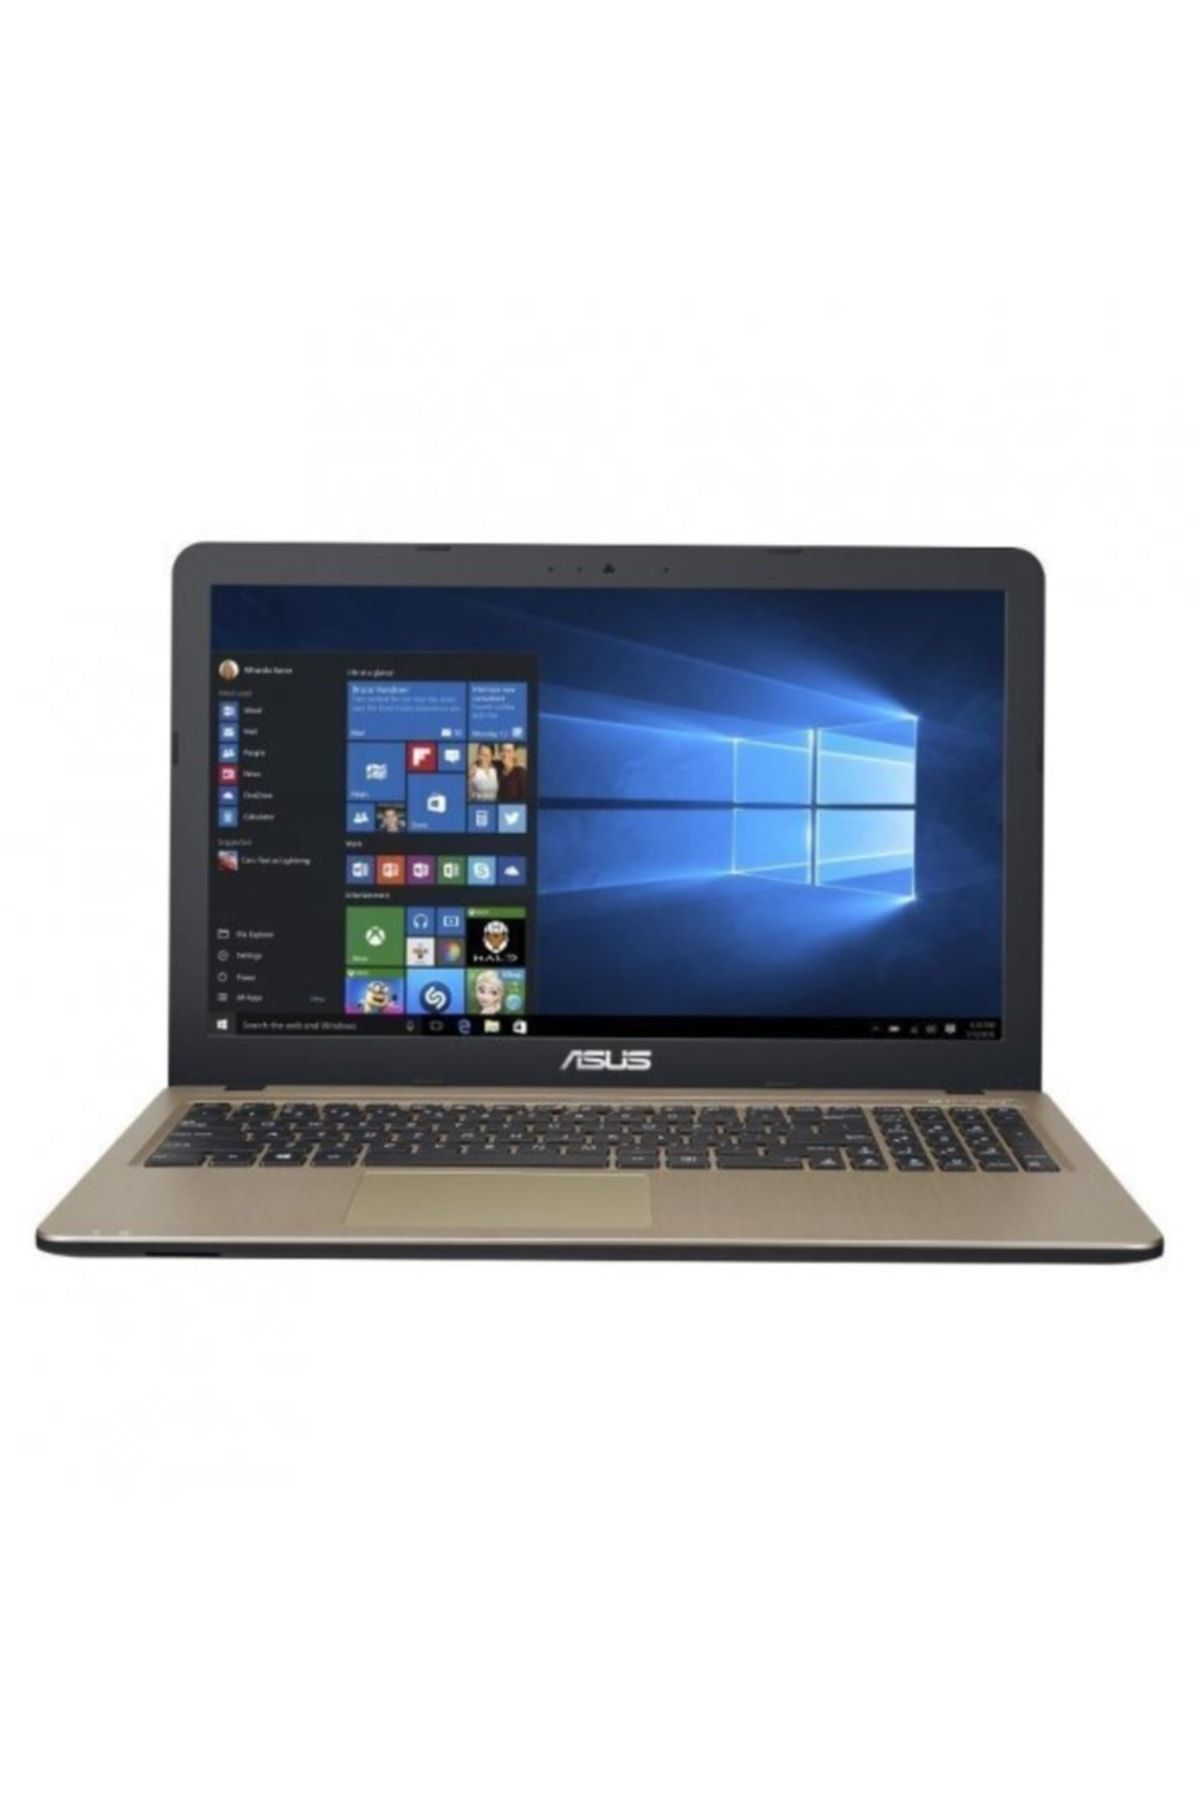 ASUS X540ba-dm317 Amd A6-9225 4gb 256ssd 15"6 Freedos Notebook